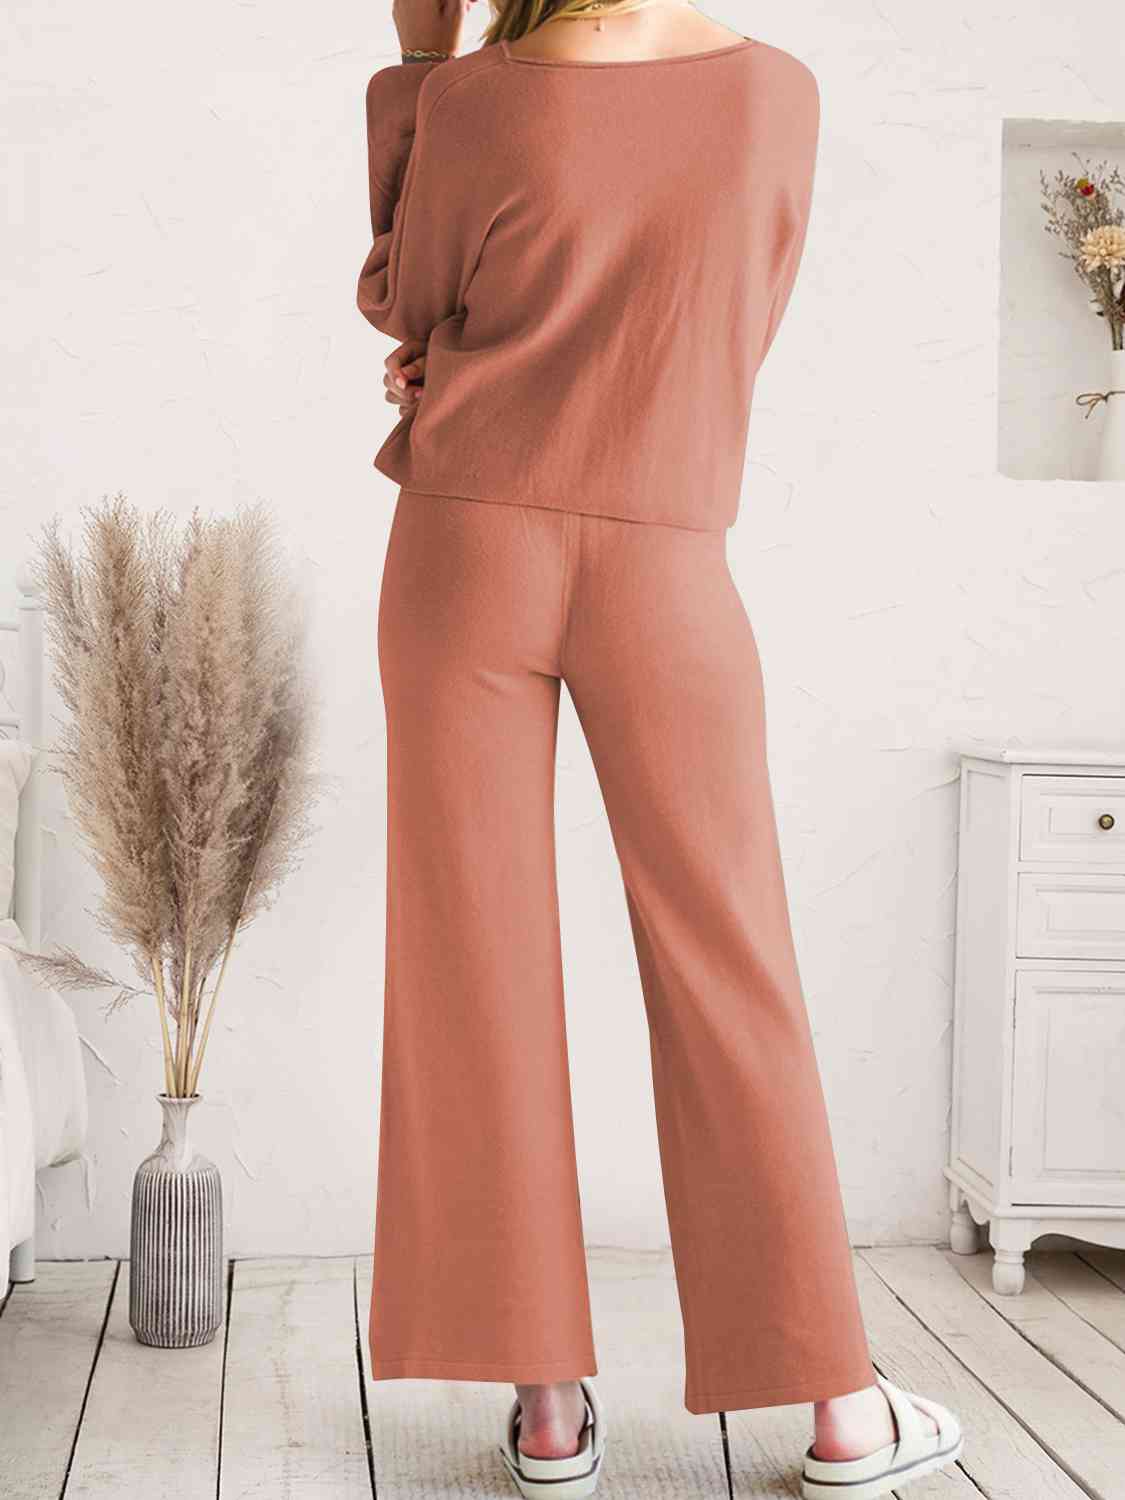 Long Sleeve Lounge Top and Drawstring Pants Set BLUE ZONE PLANET